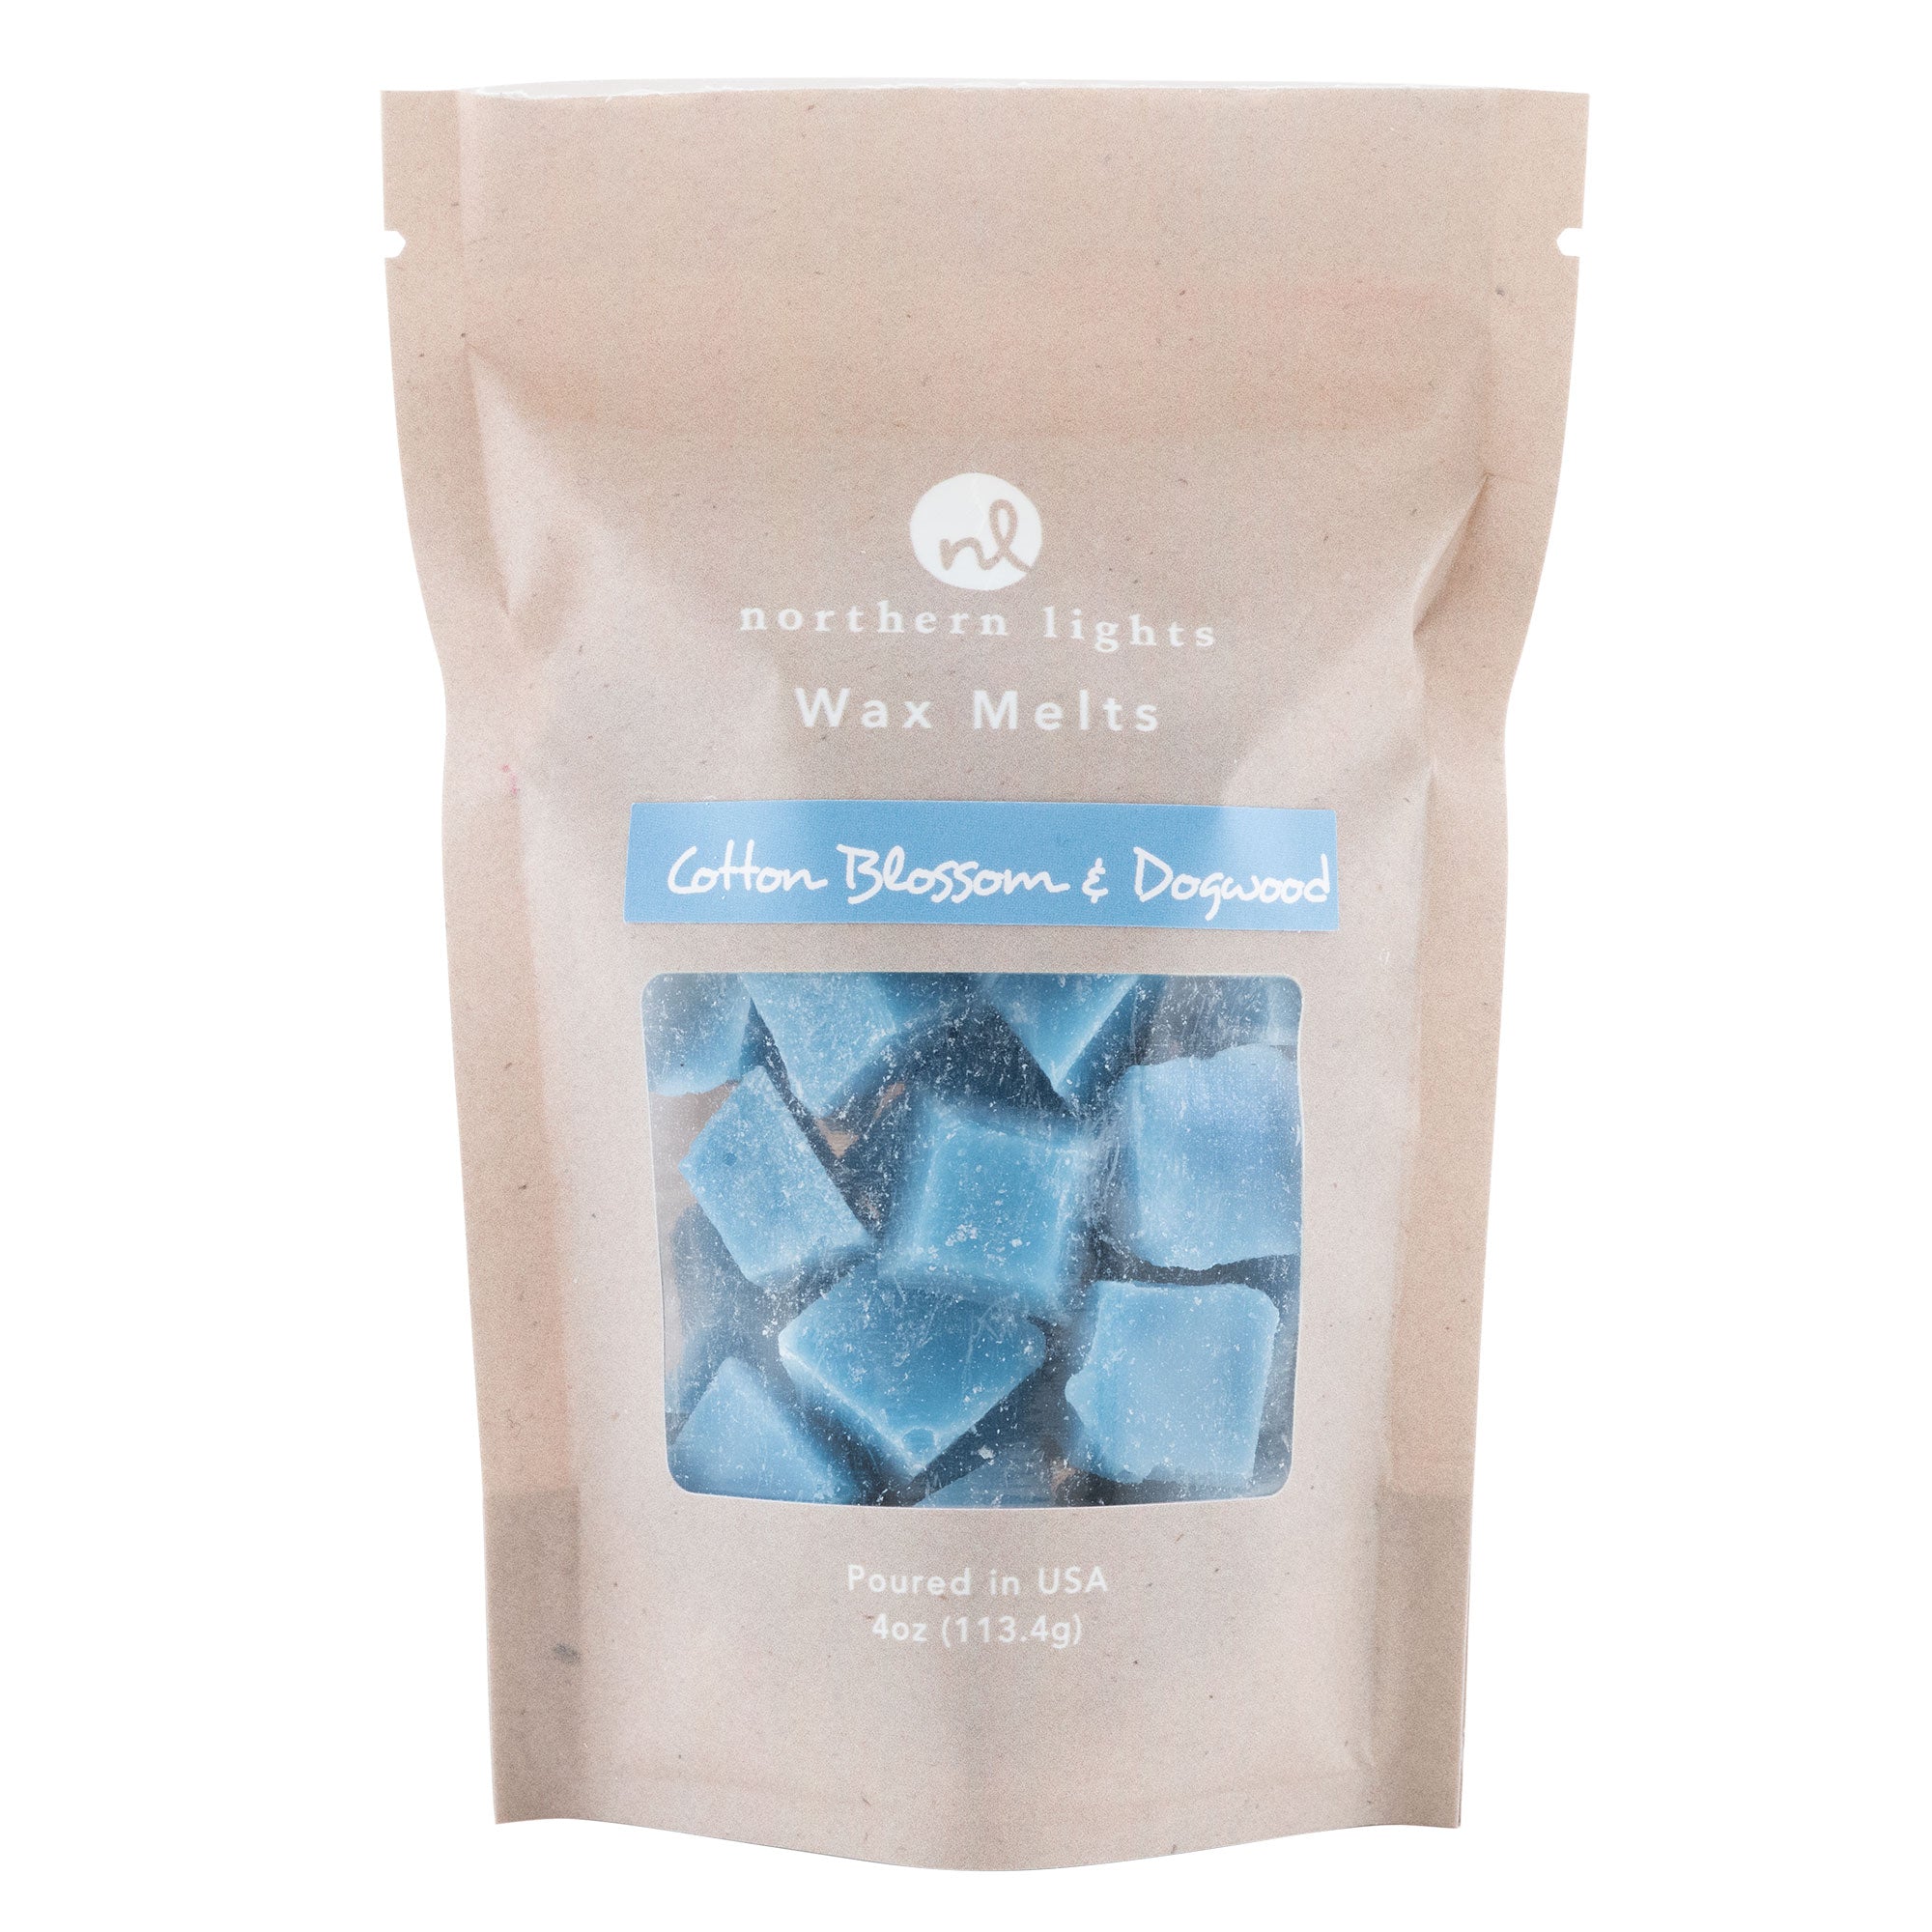 White Current & Jasmine by Northern Lights Wax Melts Pouch 4 oz